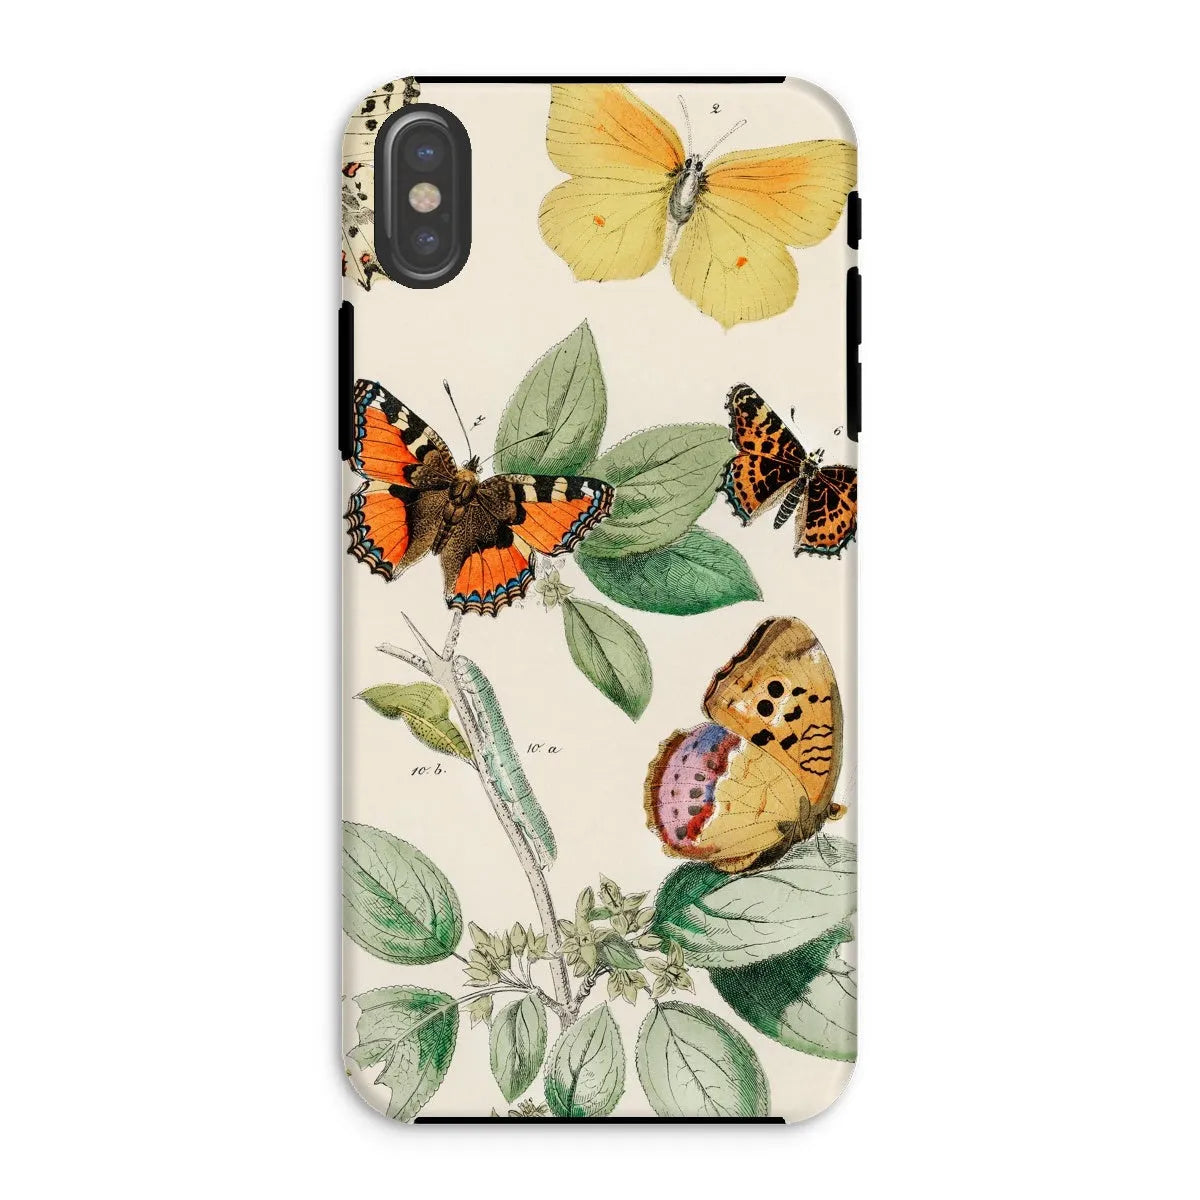 Butterfly Aesthetic Art Phone Case - William Forsell Kirby - Iphone Xs / Matte - Mobile Phone Cases - Aesthetic Art